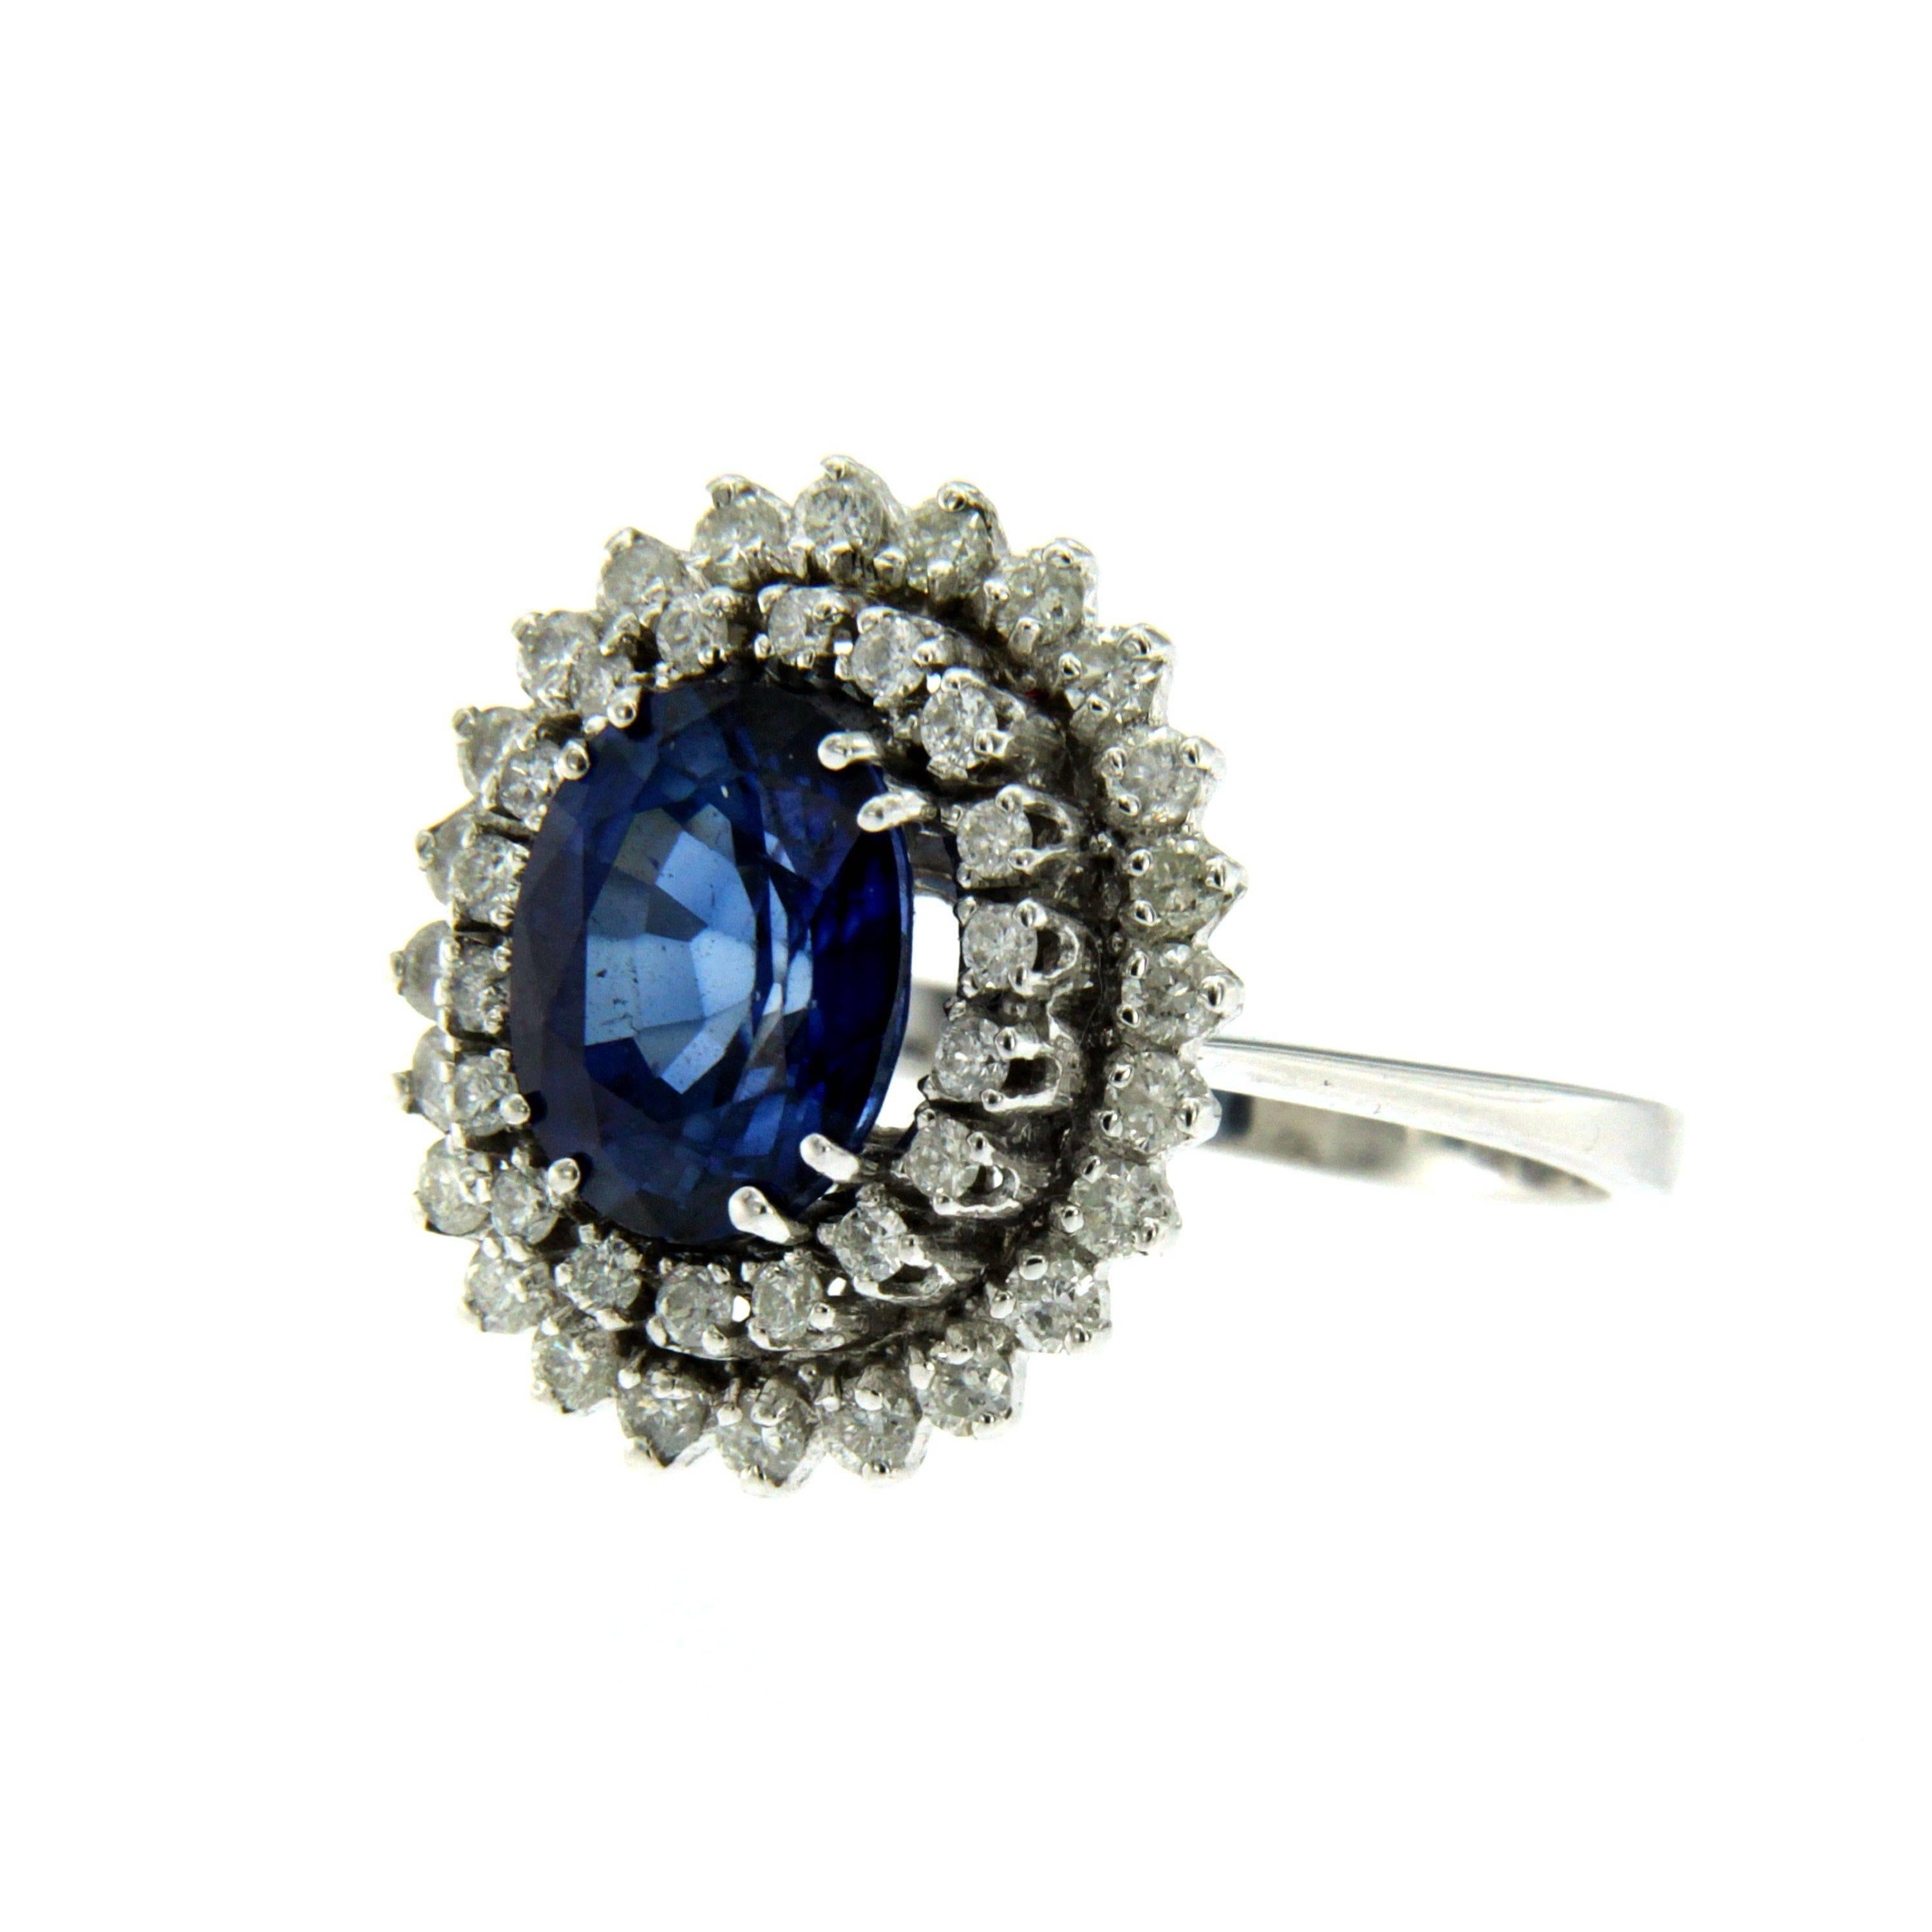 A fine and impressive 18k white Gold, Sapphire and Diamond Ring, set in the center with an oval-cut Sapphire weighing 3 carats framed by a double halo consisting of 1 carat of round brilliant cut diamonds graded G color and Vvs clarity.
Circa